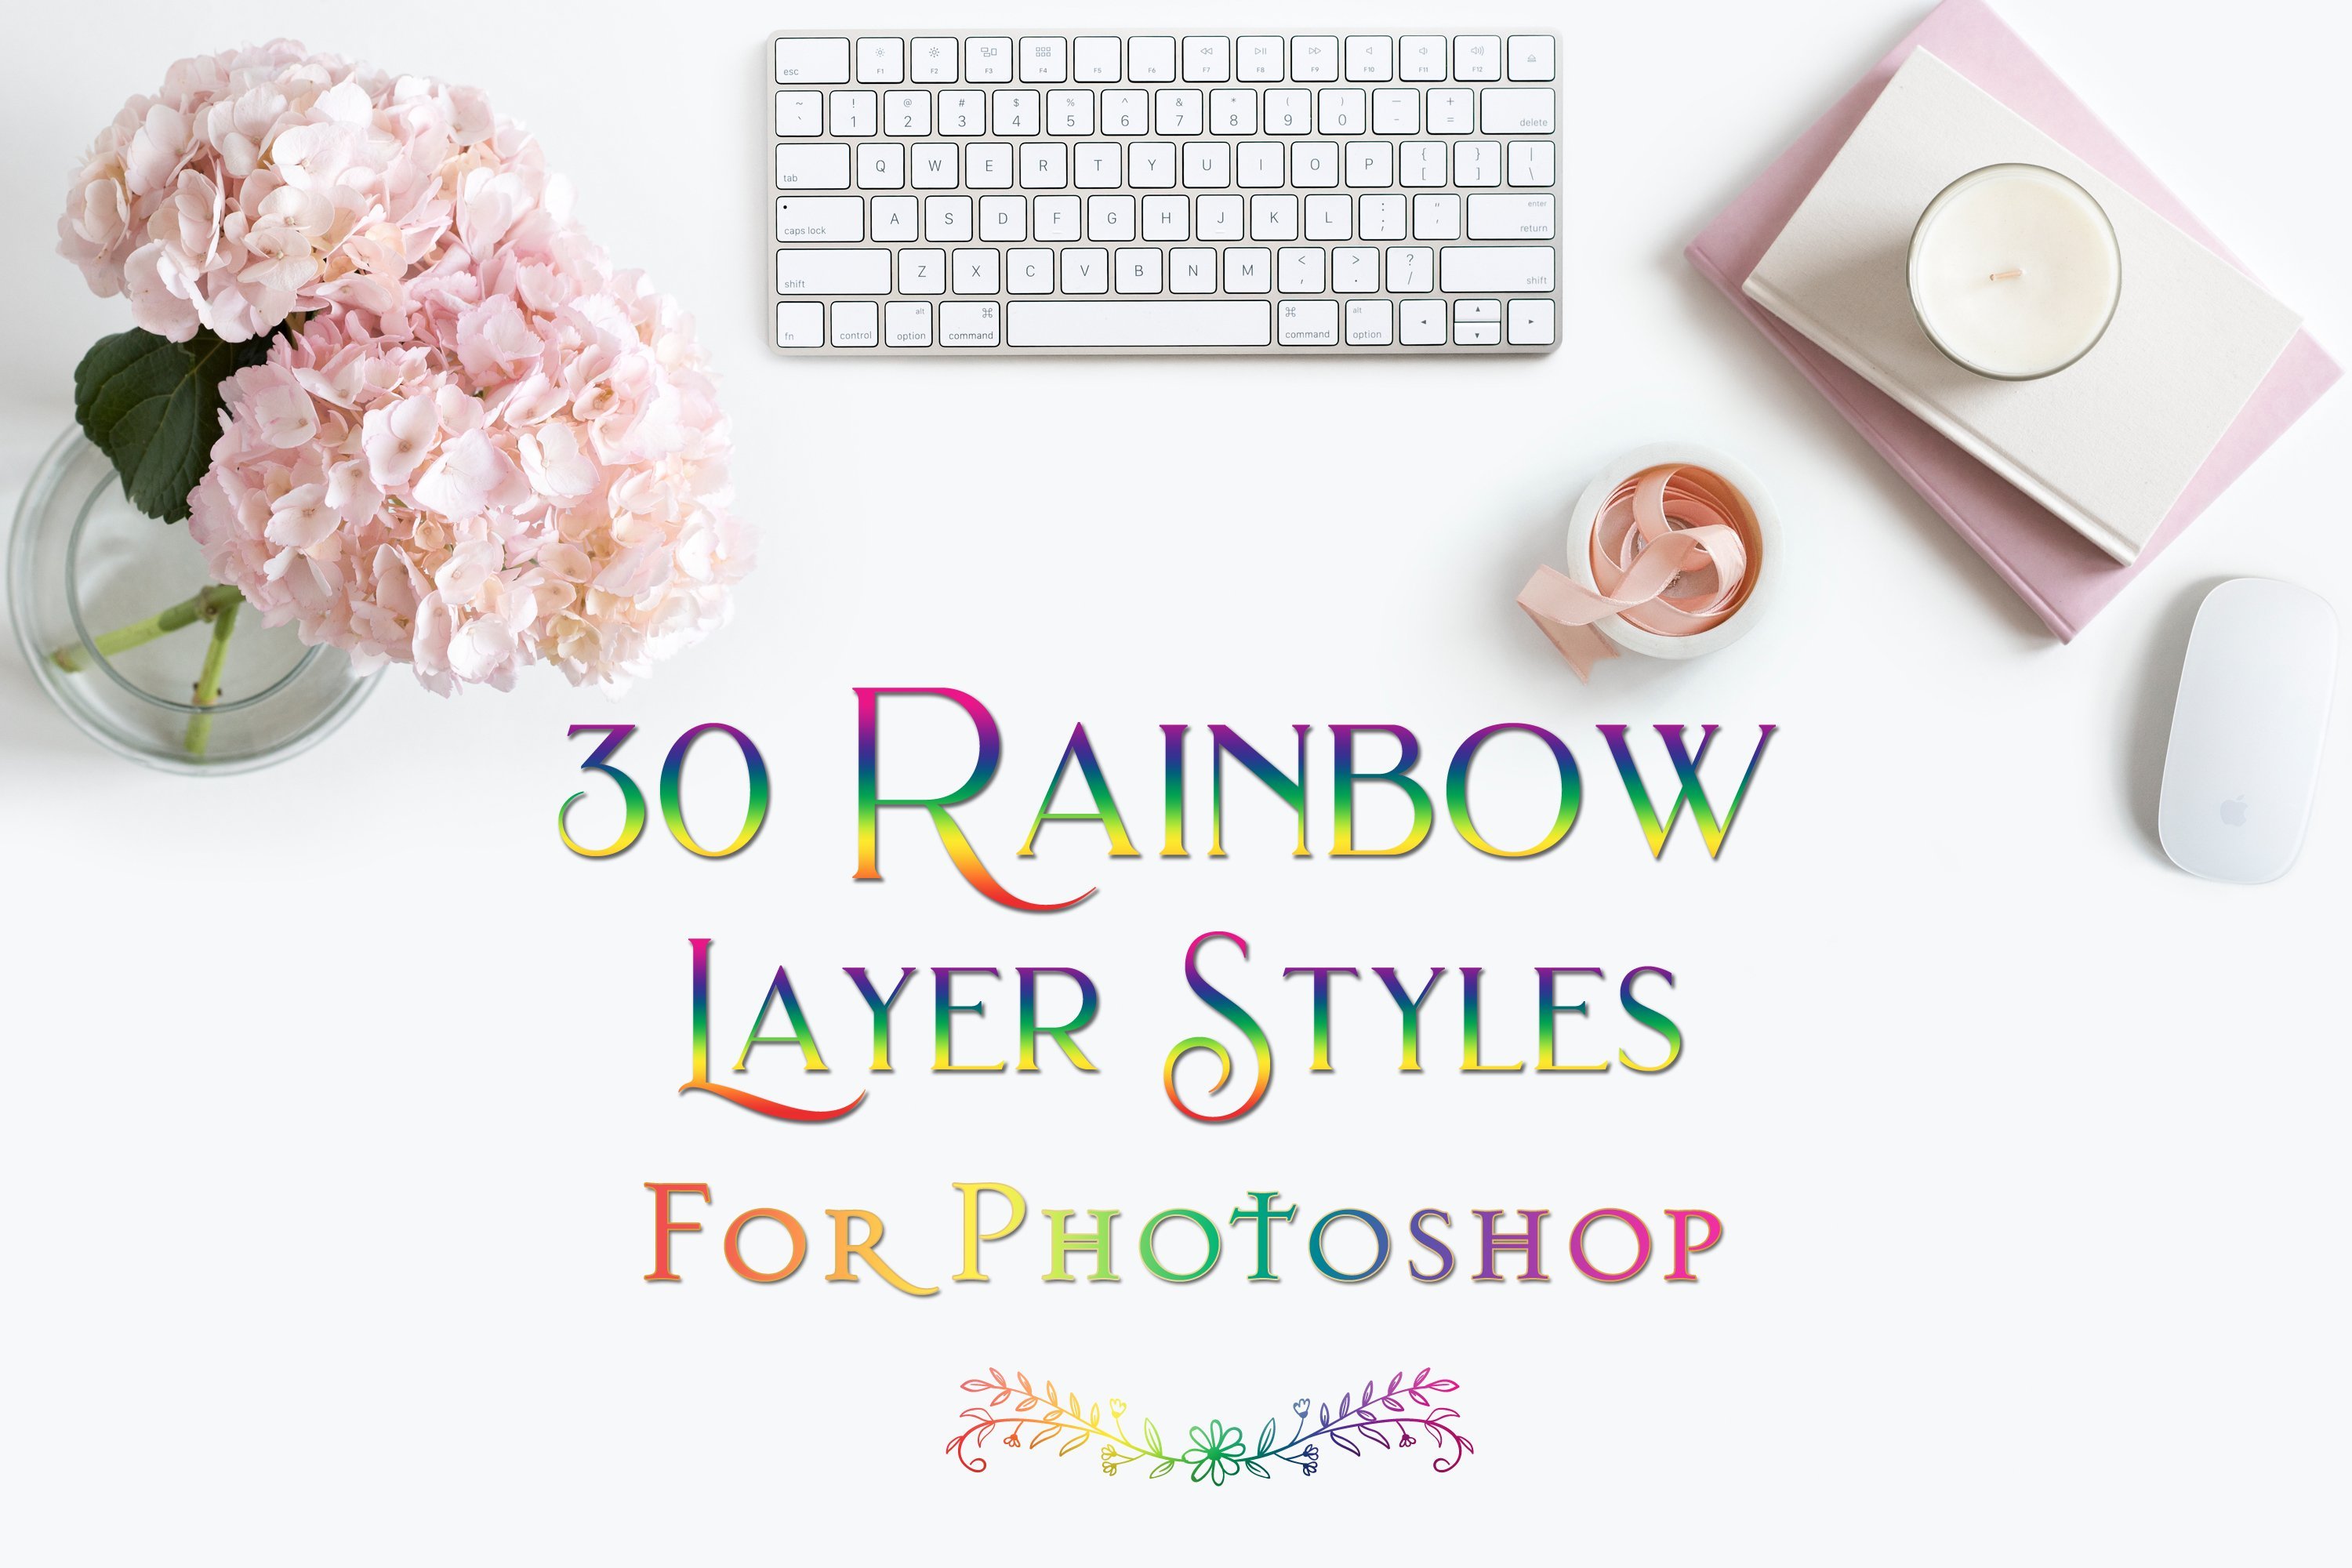 Rainbow Layer Styles for Photoshopcover image.